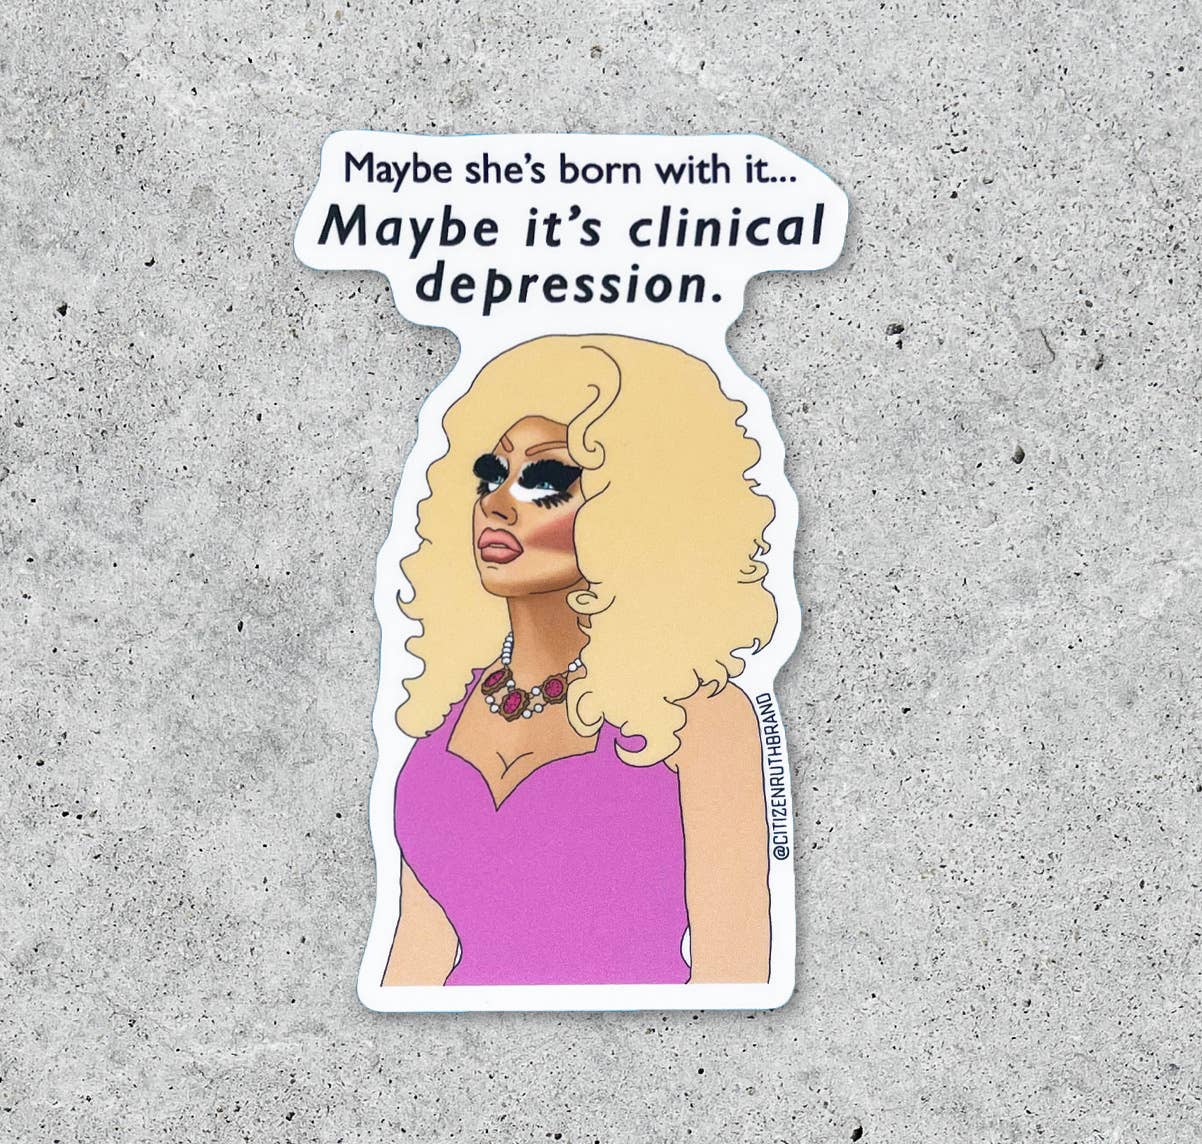 Trixie Mattel Maybe She’s Born With It Sticker